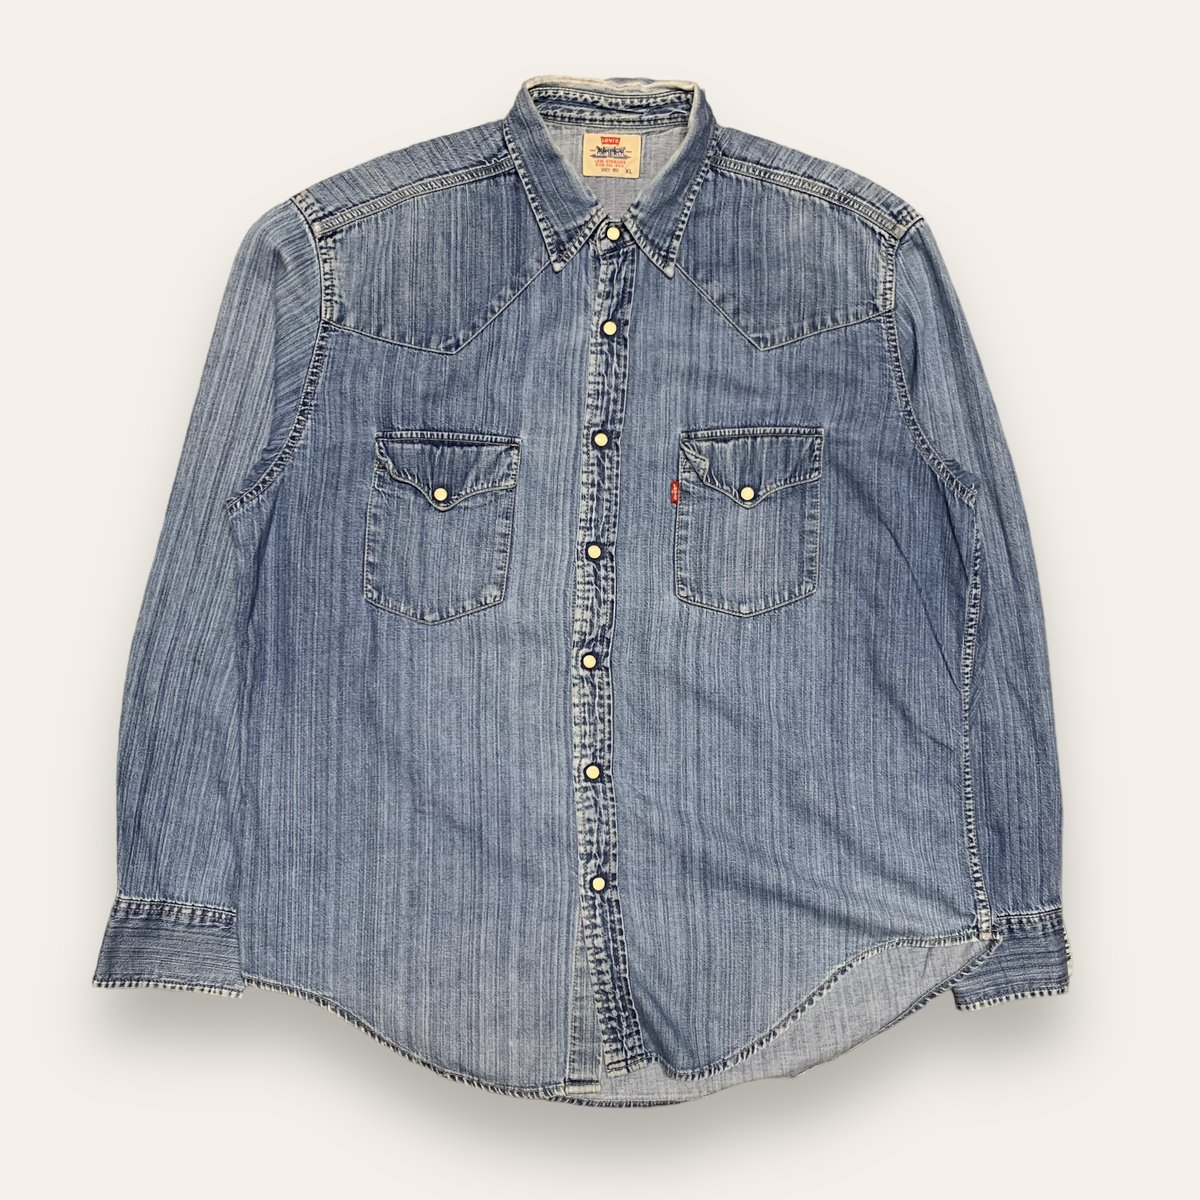 Image of Denim shirt blue mother of pearl Levi's by Lighthouse